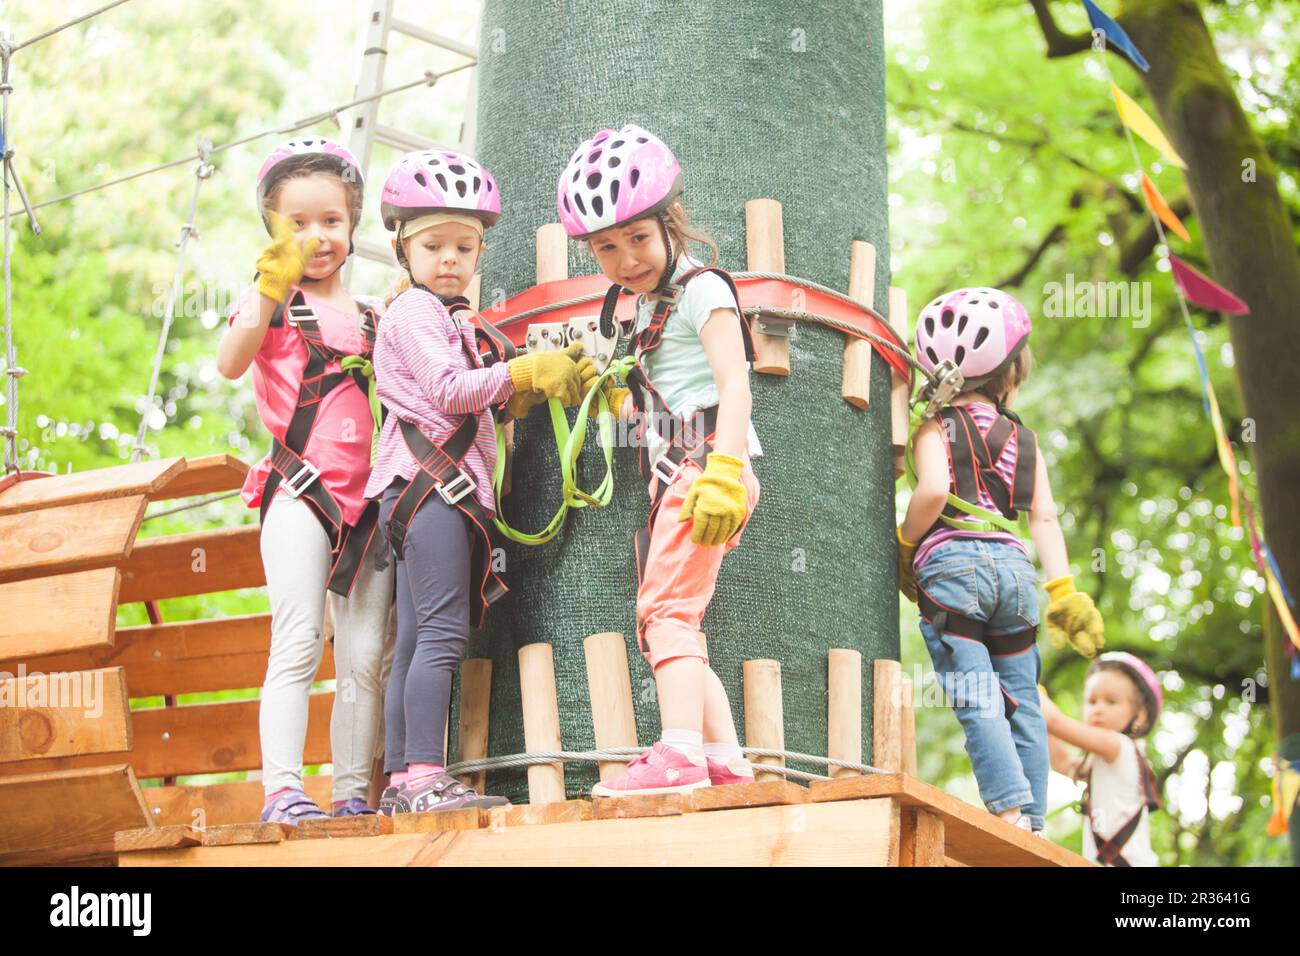 The obstacle course in adventure park Stock Photo